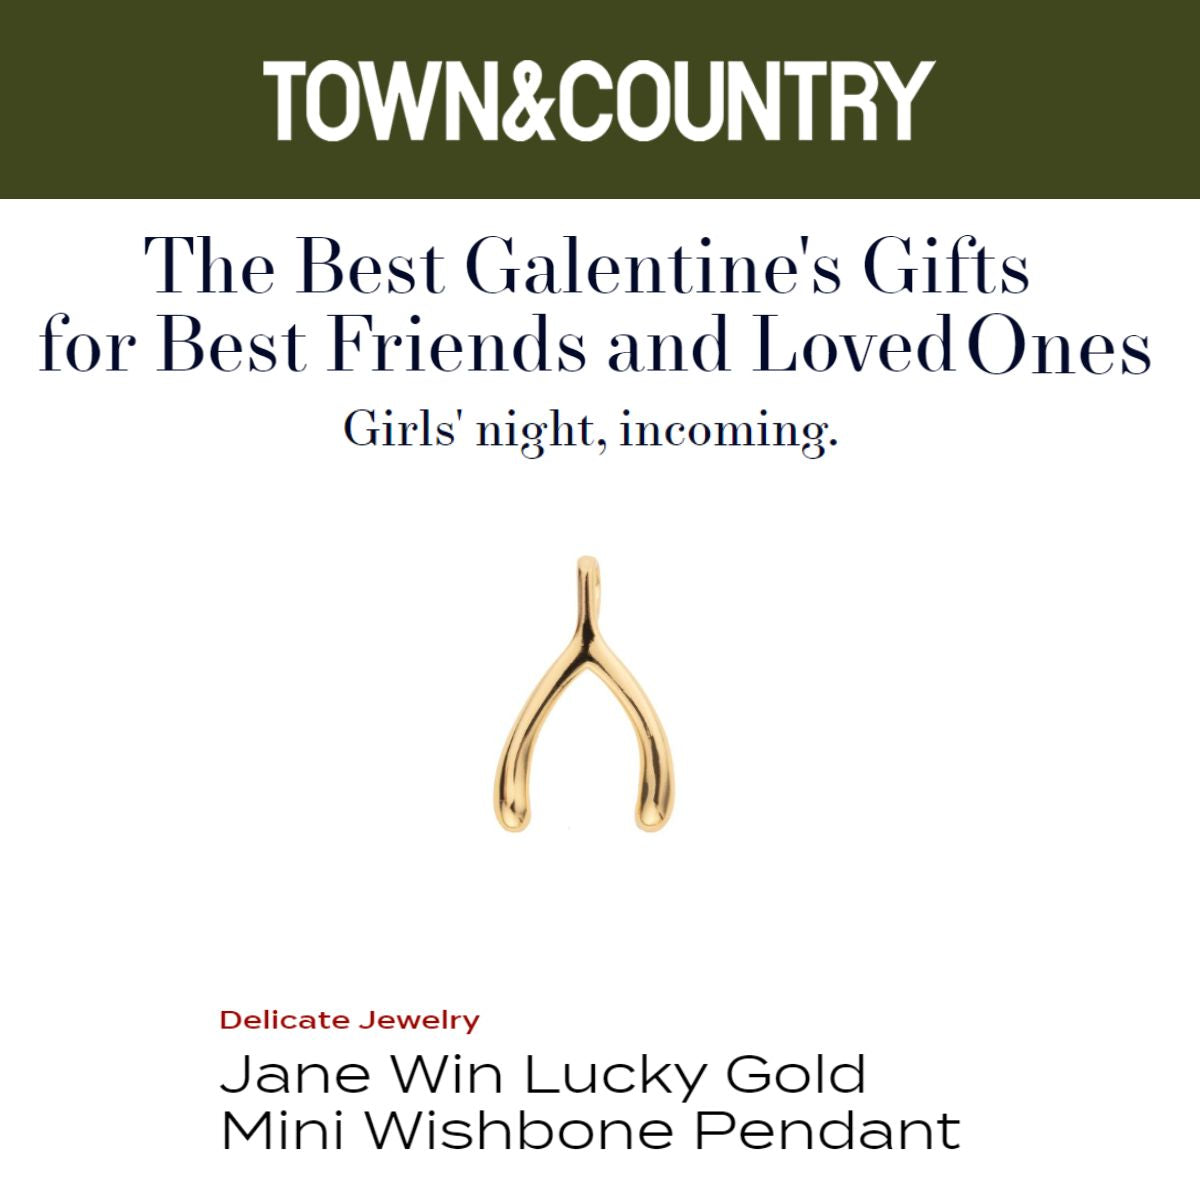 Press Highlight: Town & Country's calls Mini Wishbone the "The Best Galentine's Gifts for Best Friends and Loved Ones"